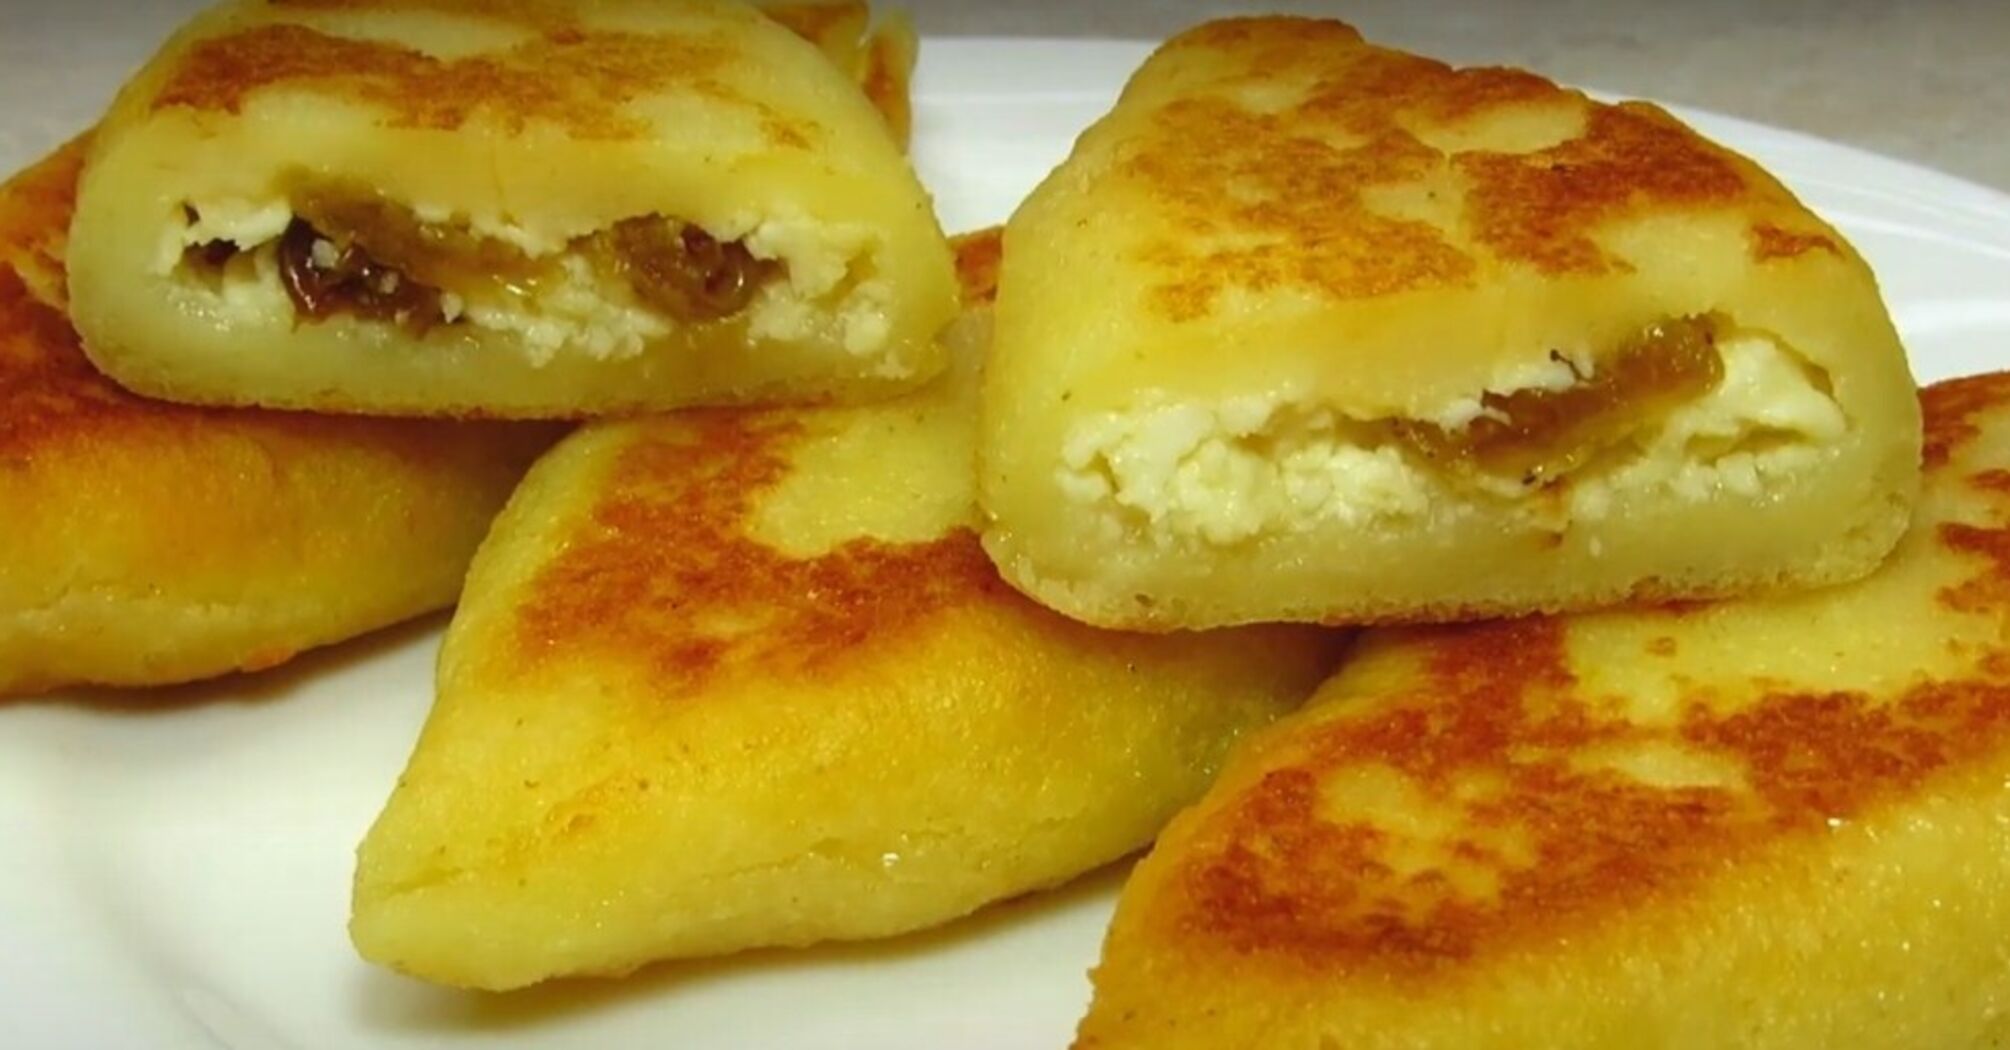 Fried semolina pies with cottage cheese and raisins